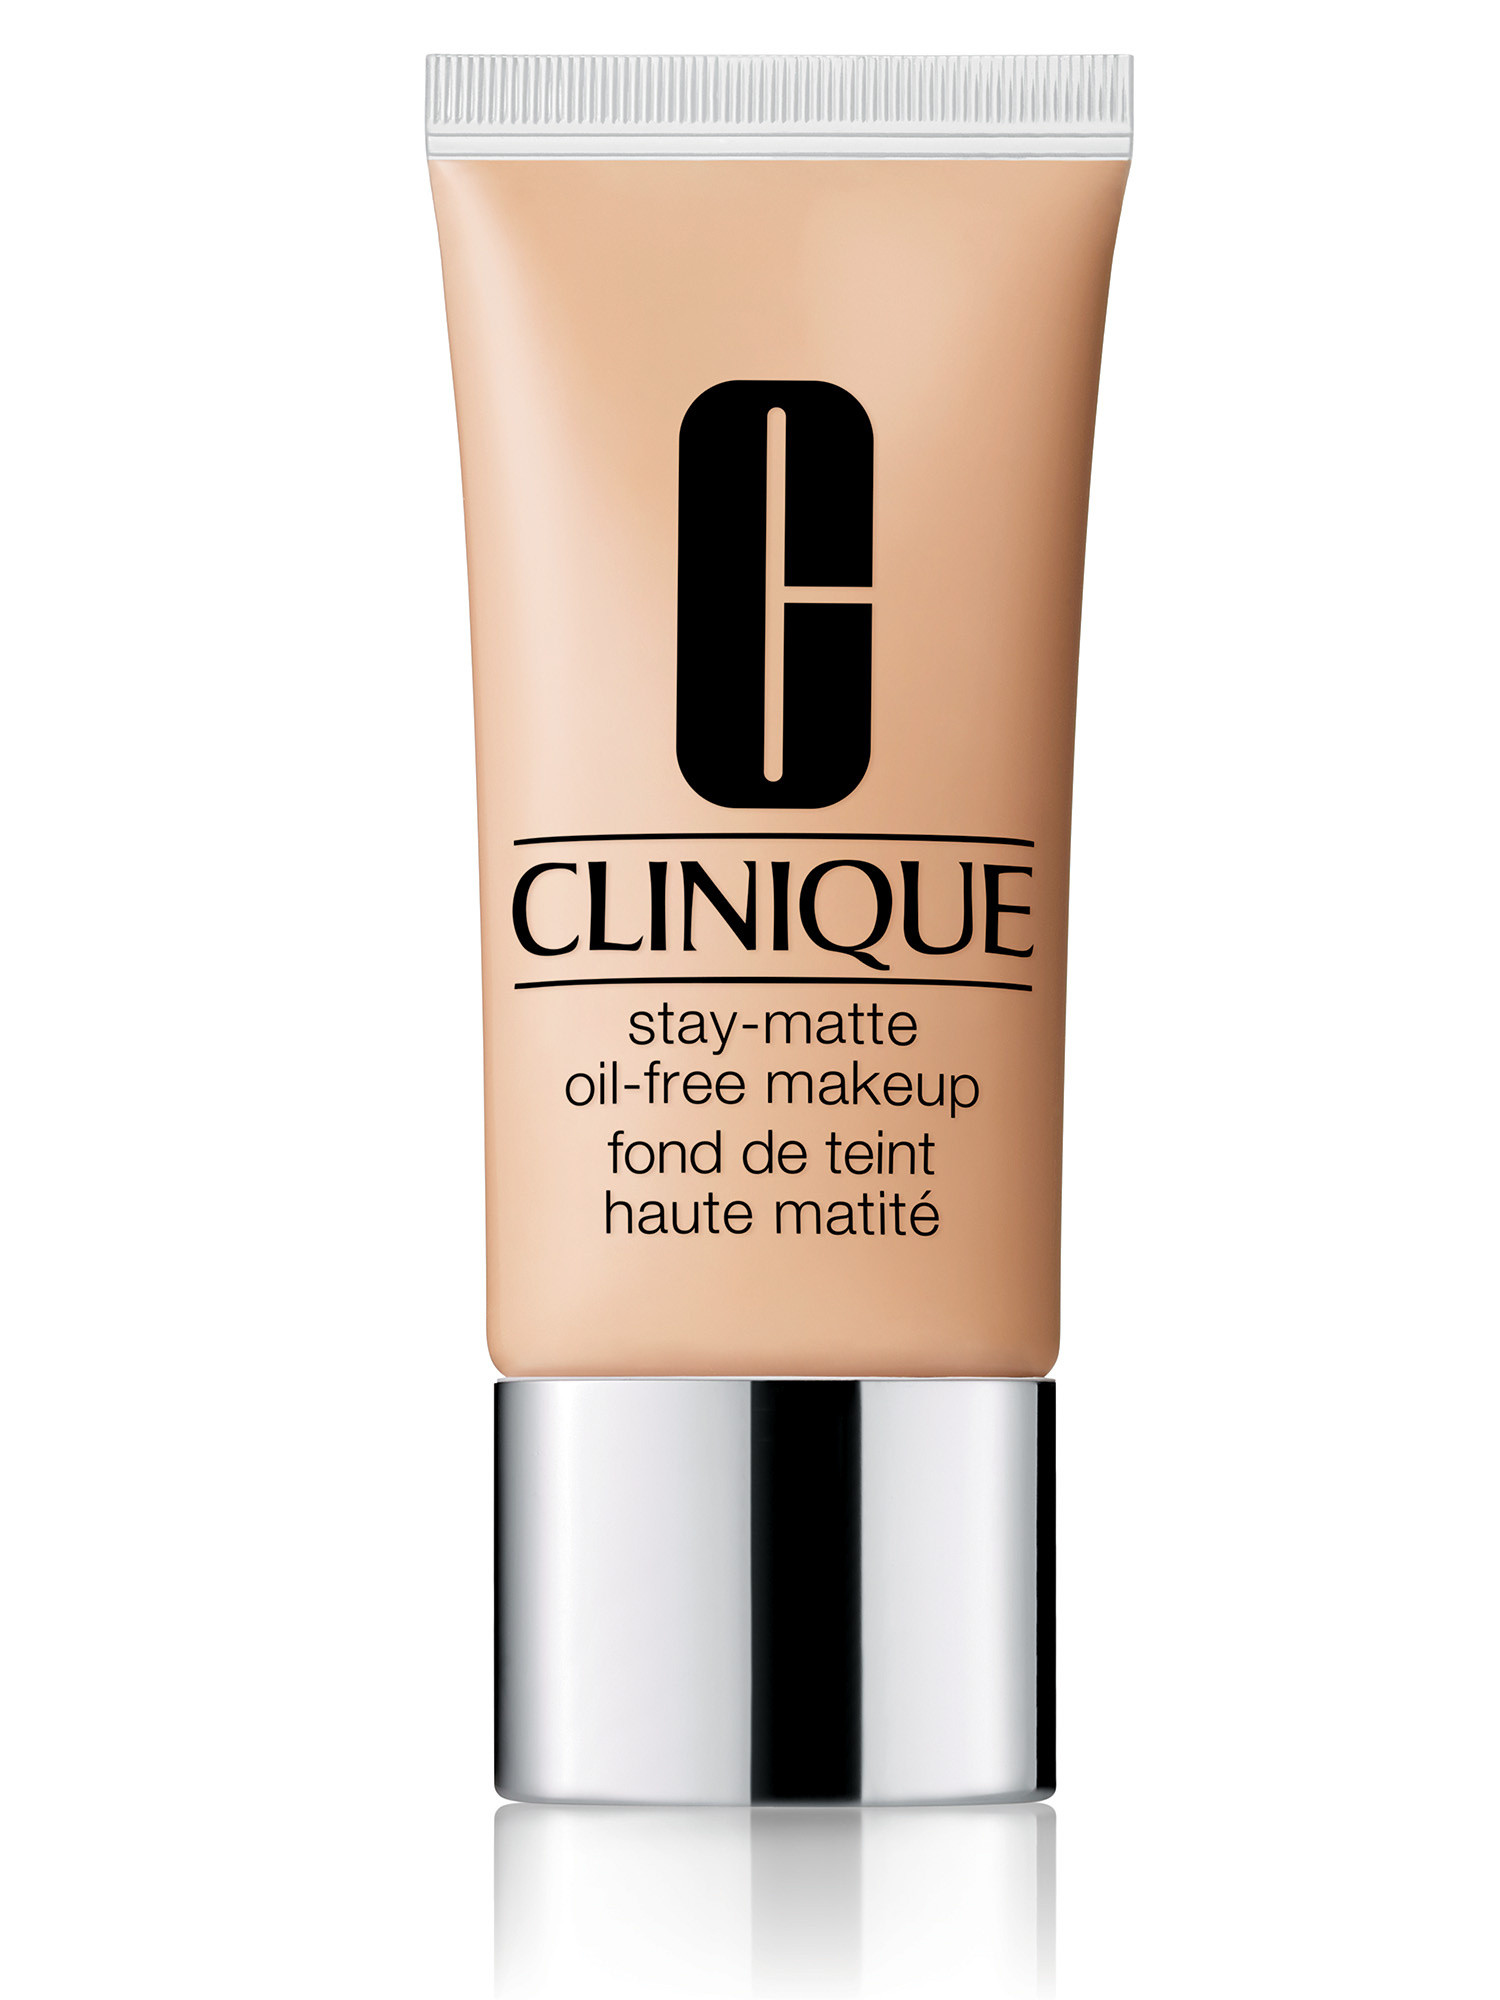 Clinique stay-matte oil-free make-up - 30 ml, CN 74 BEIGE, large image number 0